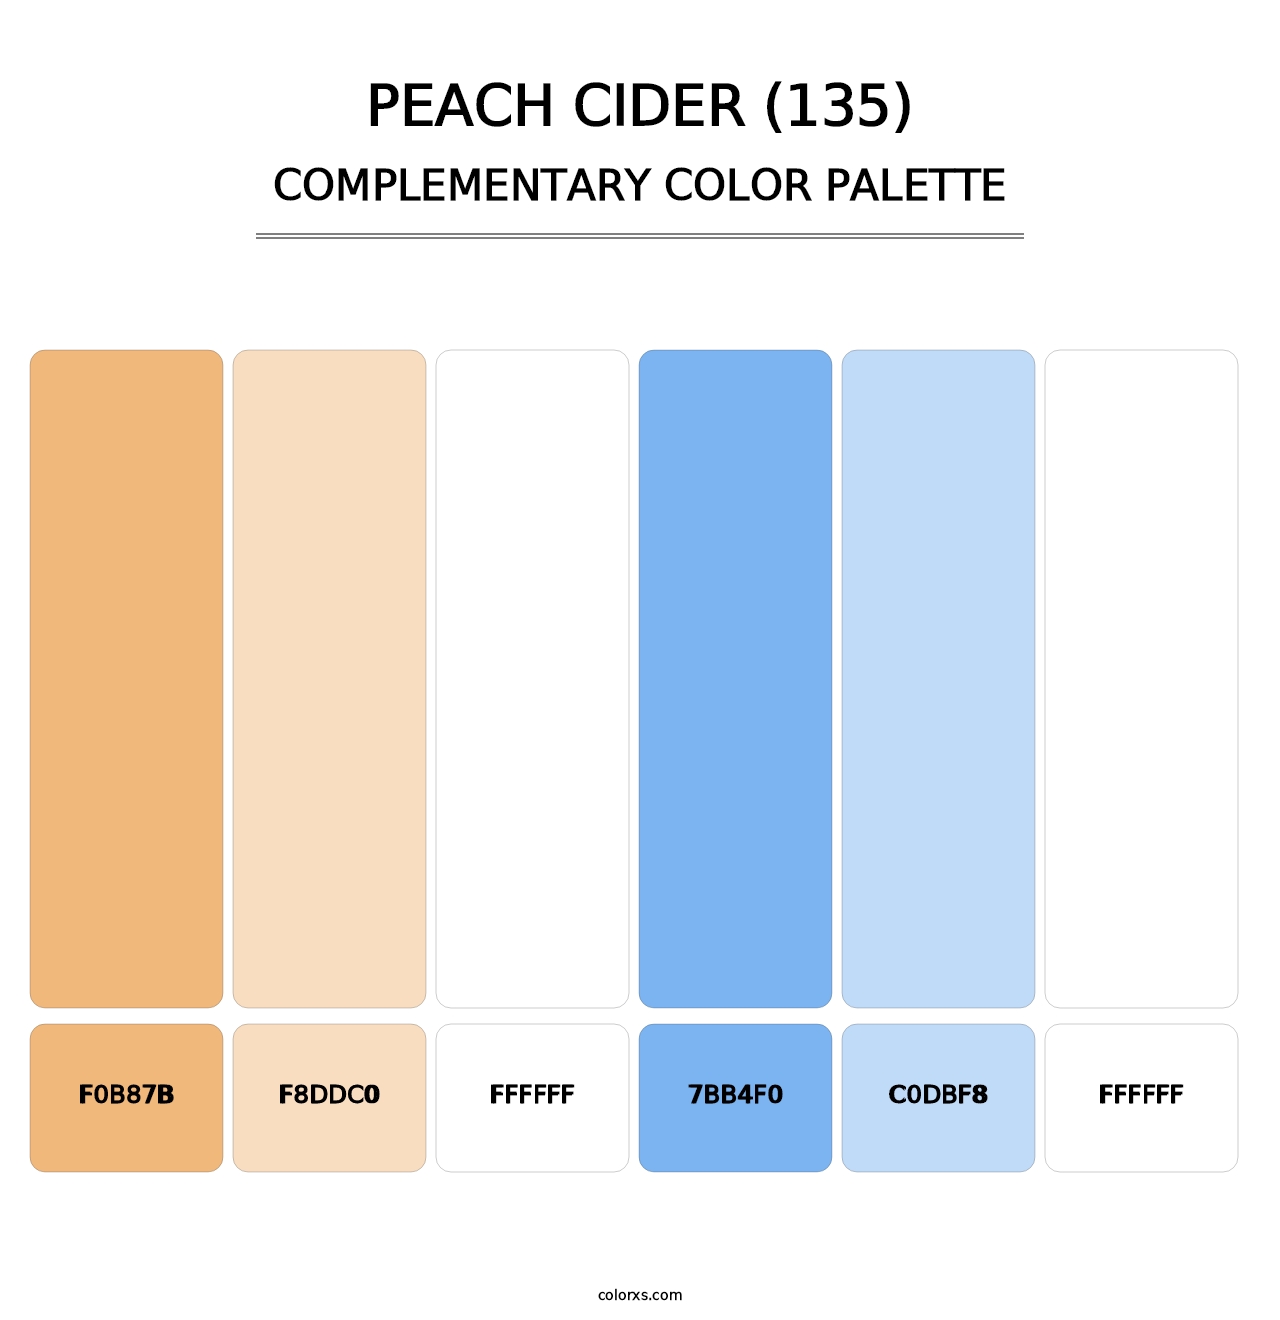 Peach Cider (135) - Complementary Color Palette